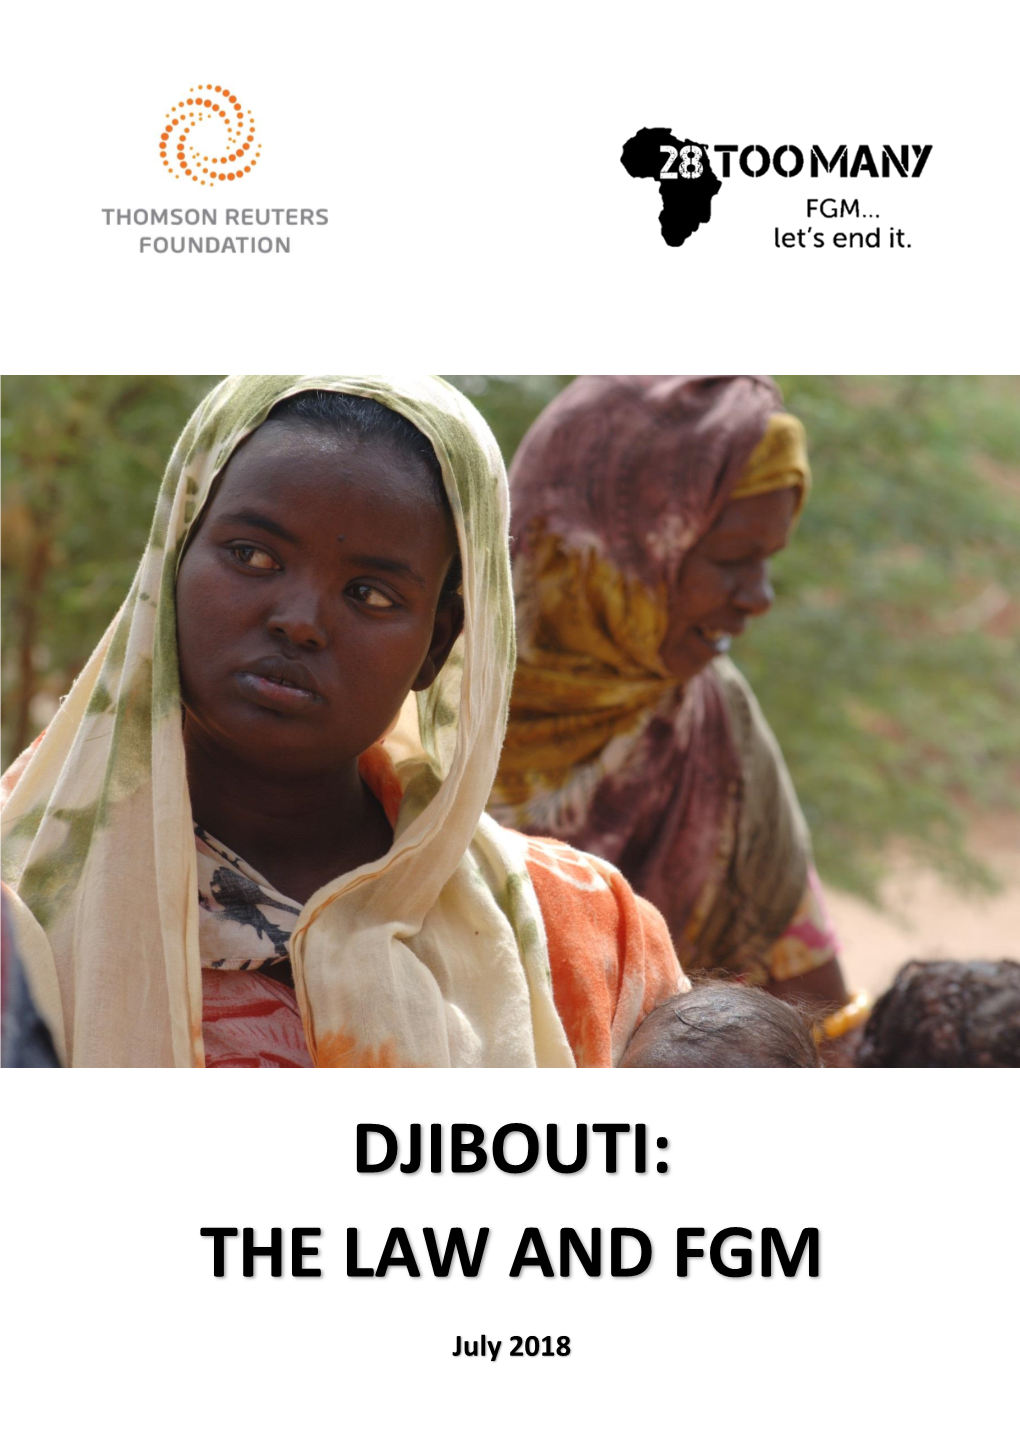 Djibouti: the Law and Fgm